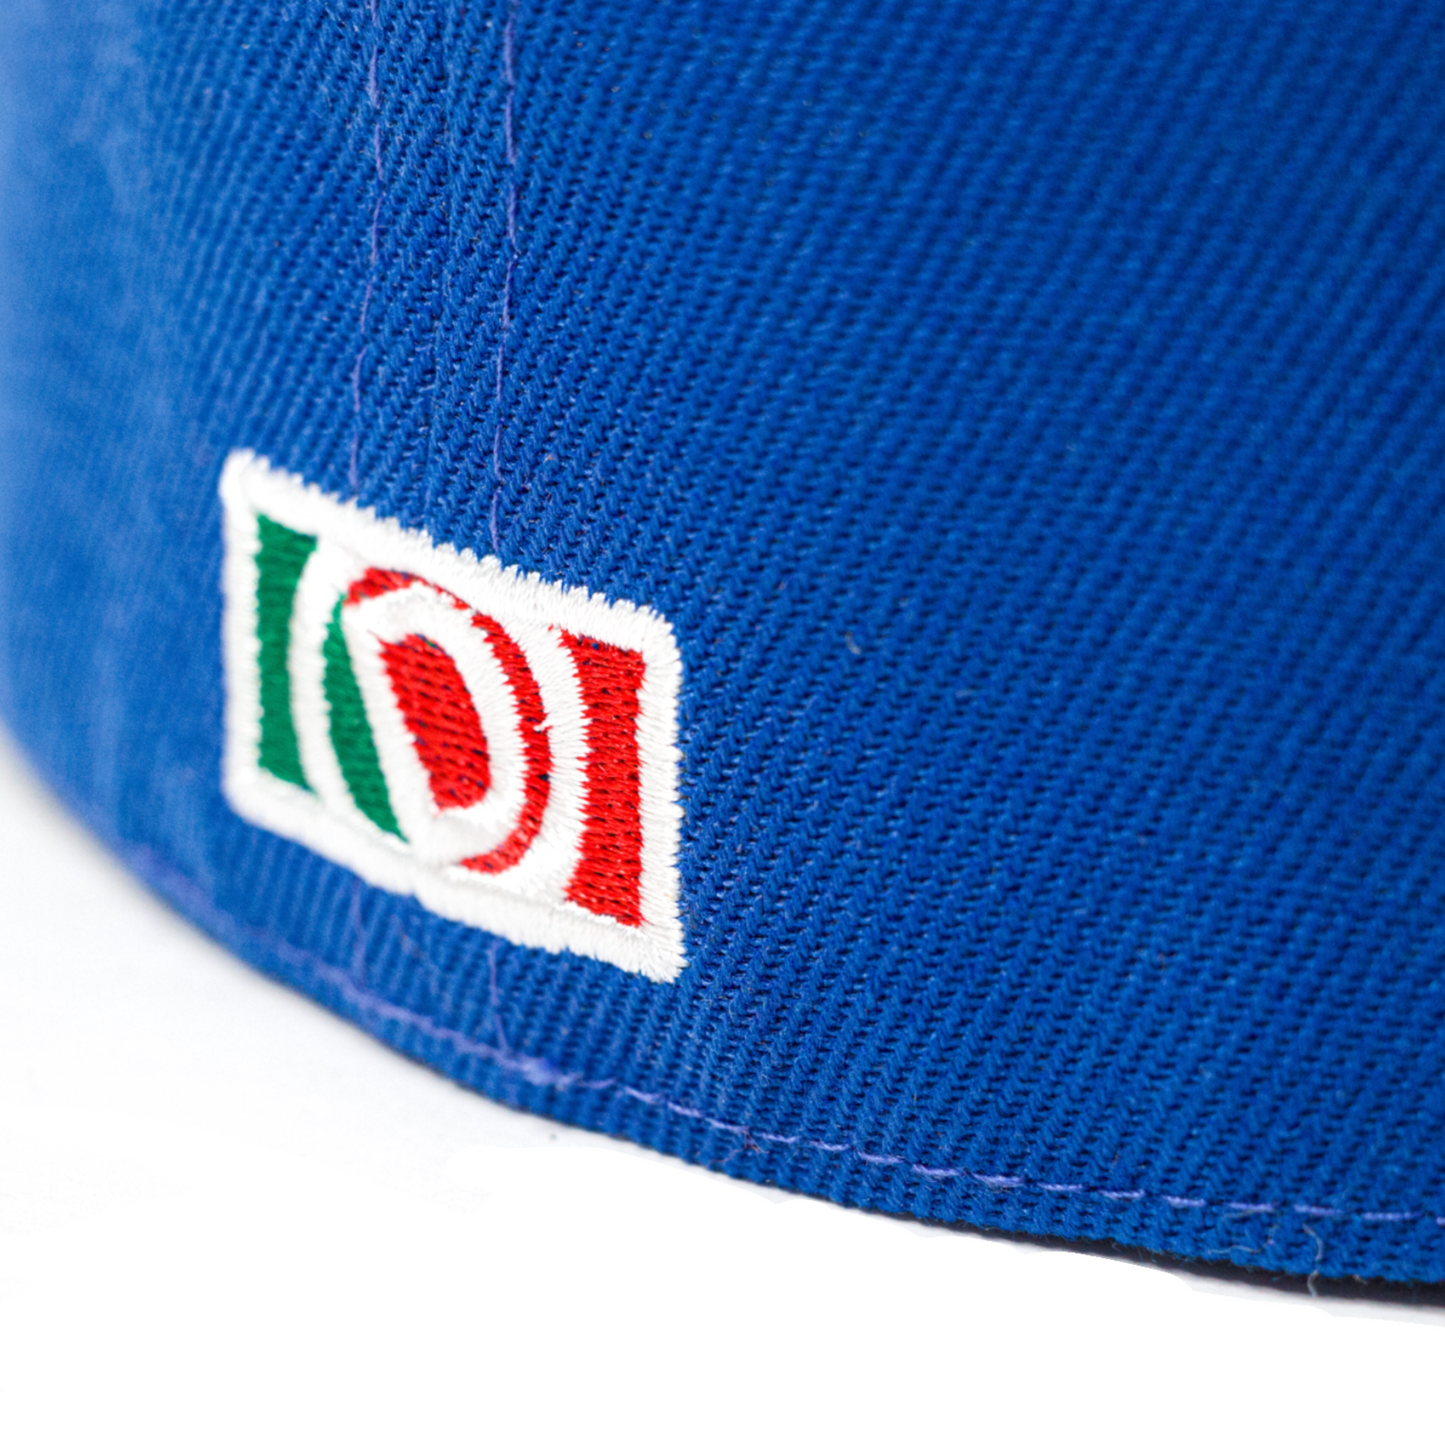 DANNY DIEGO COLECCIÓN D-STAR BLUE FITTED